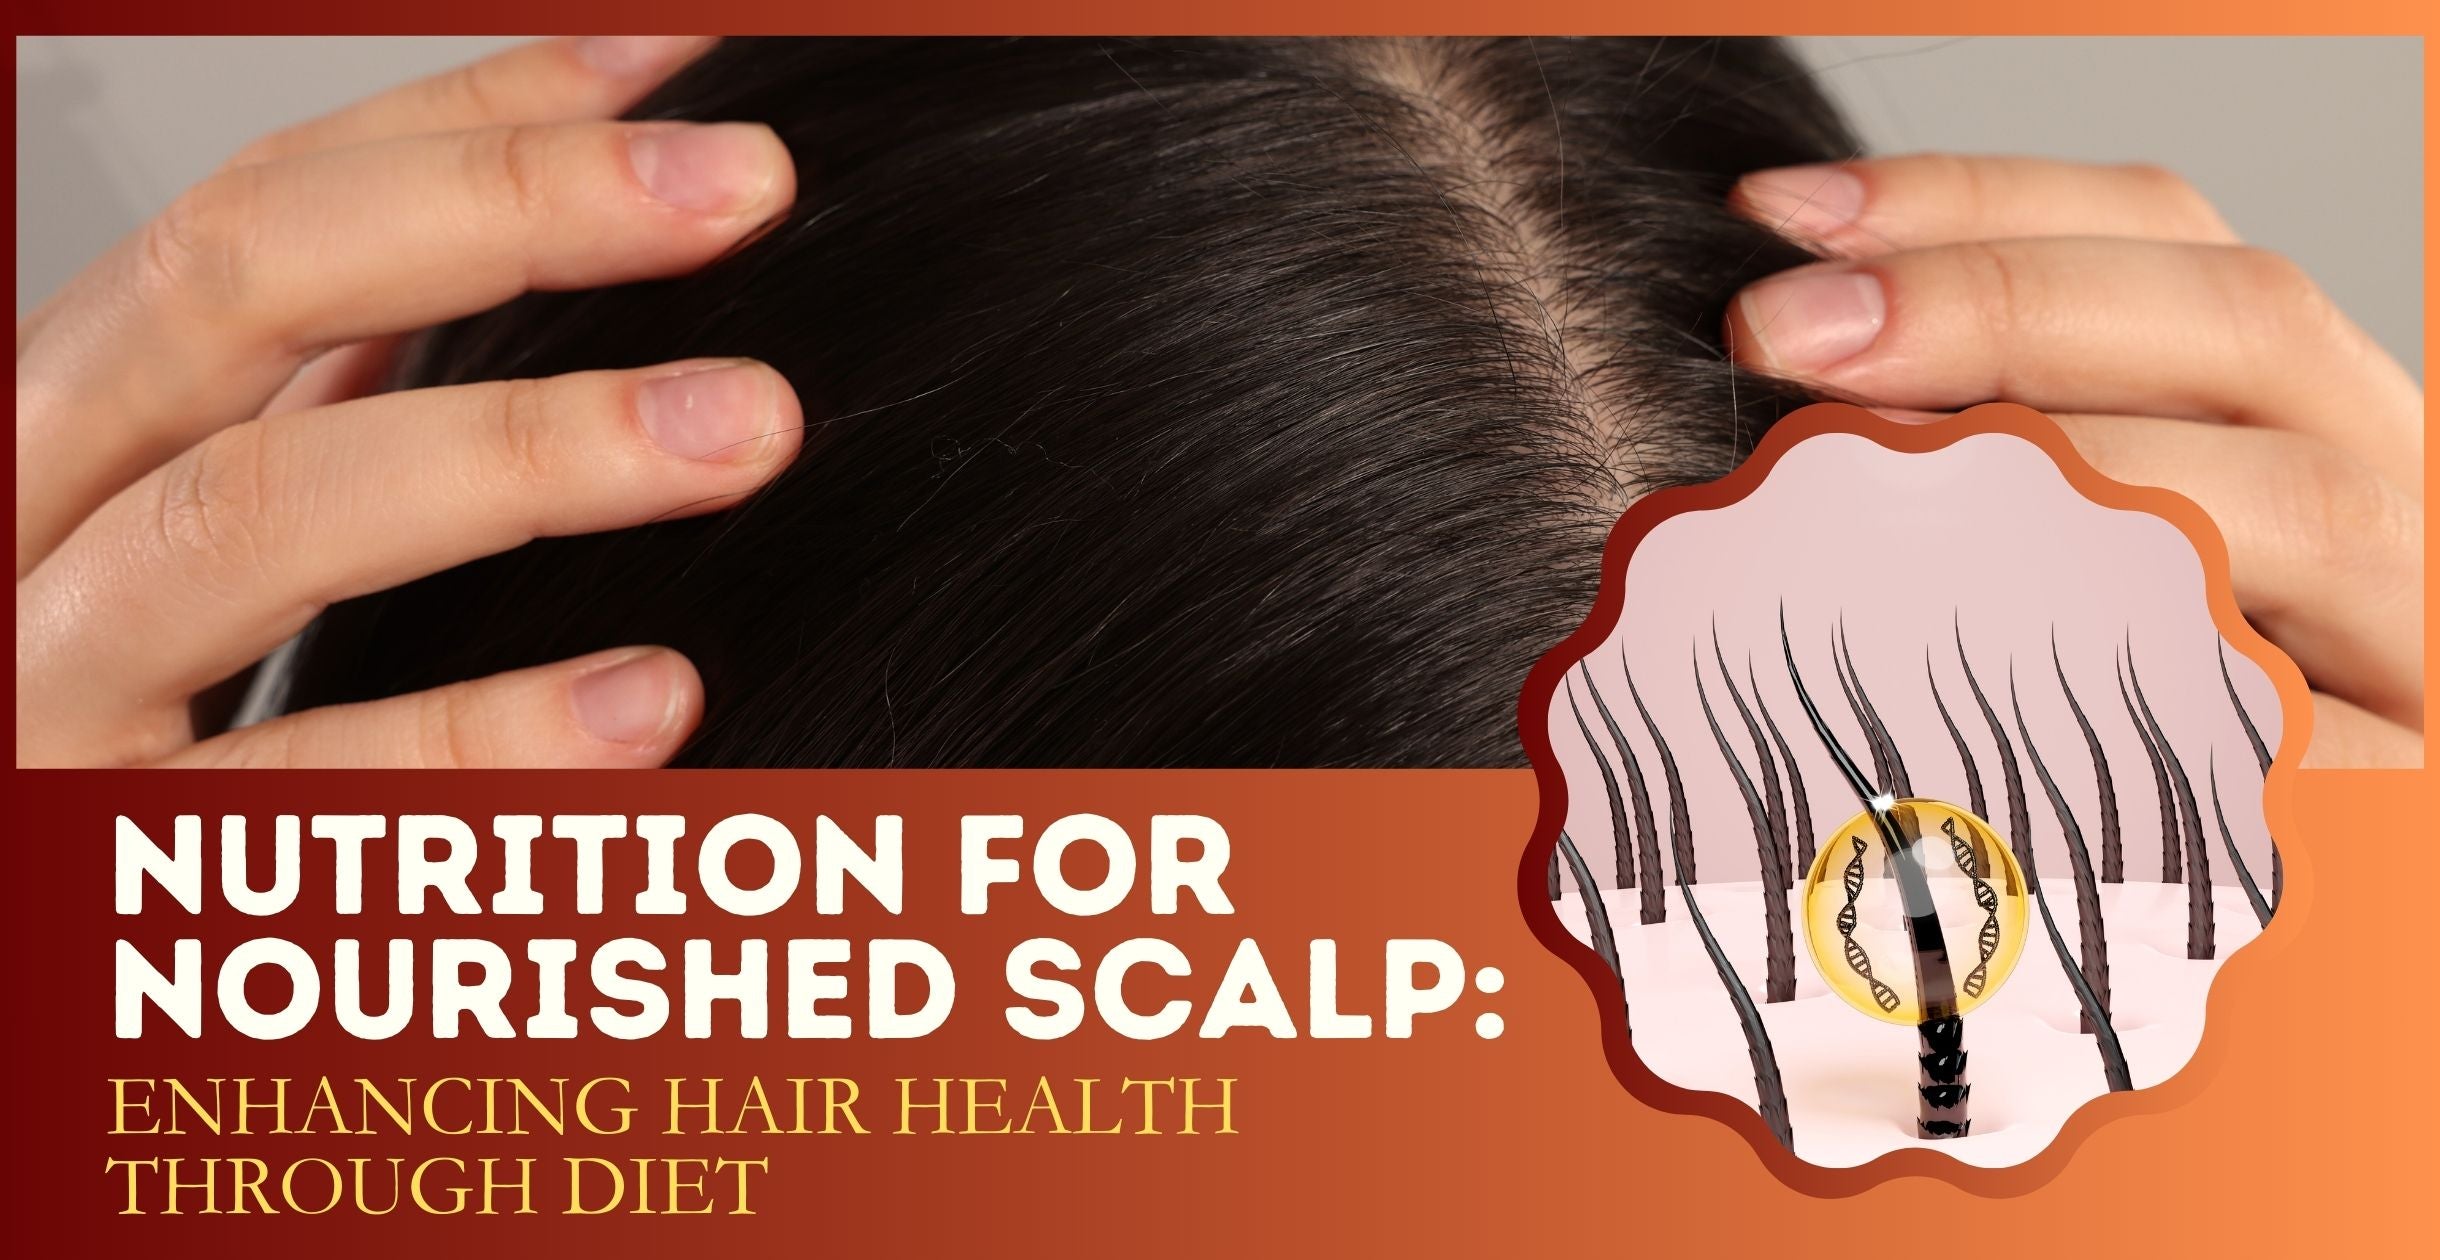 Nutrition for Nourished Scalp: Enhancing Hair Health Through Diet